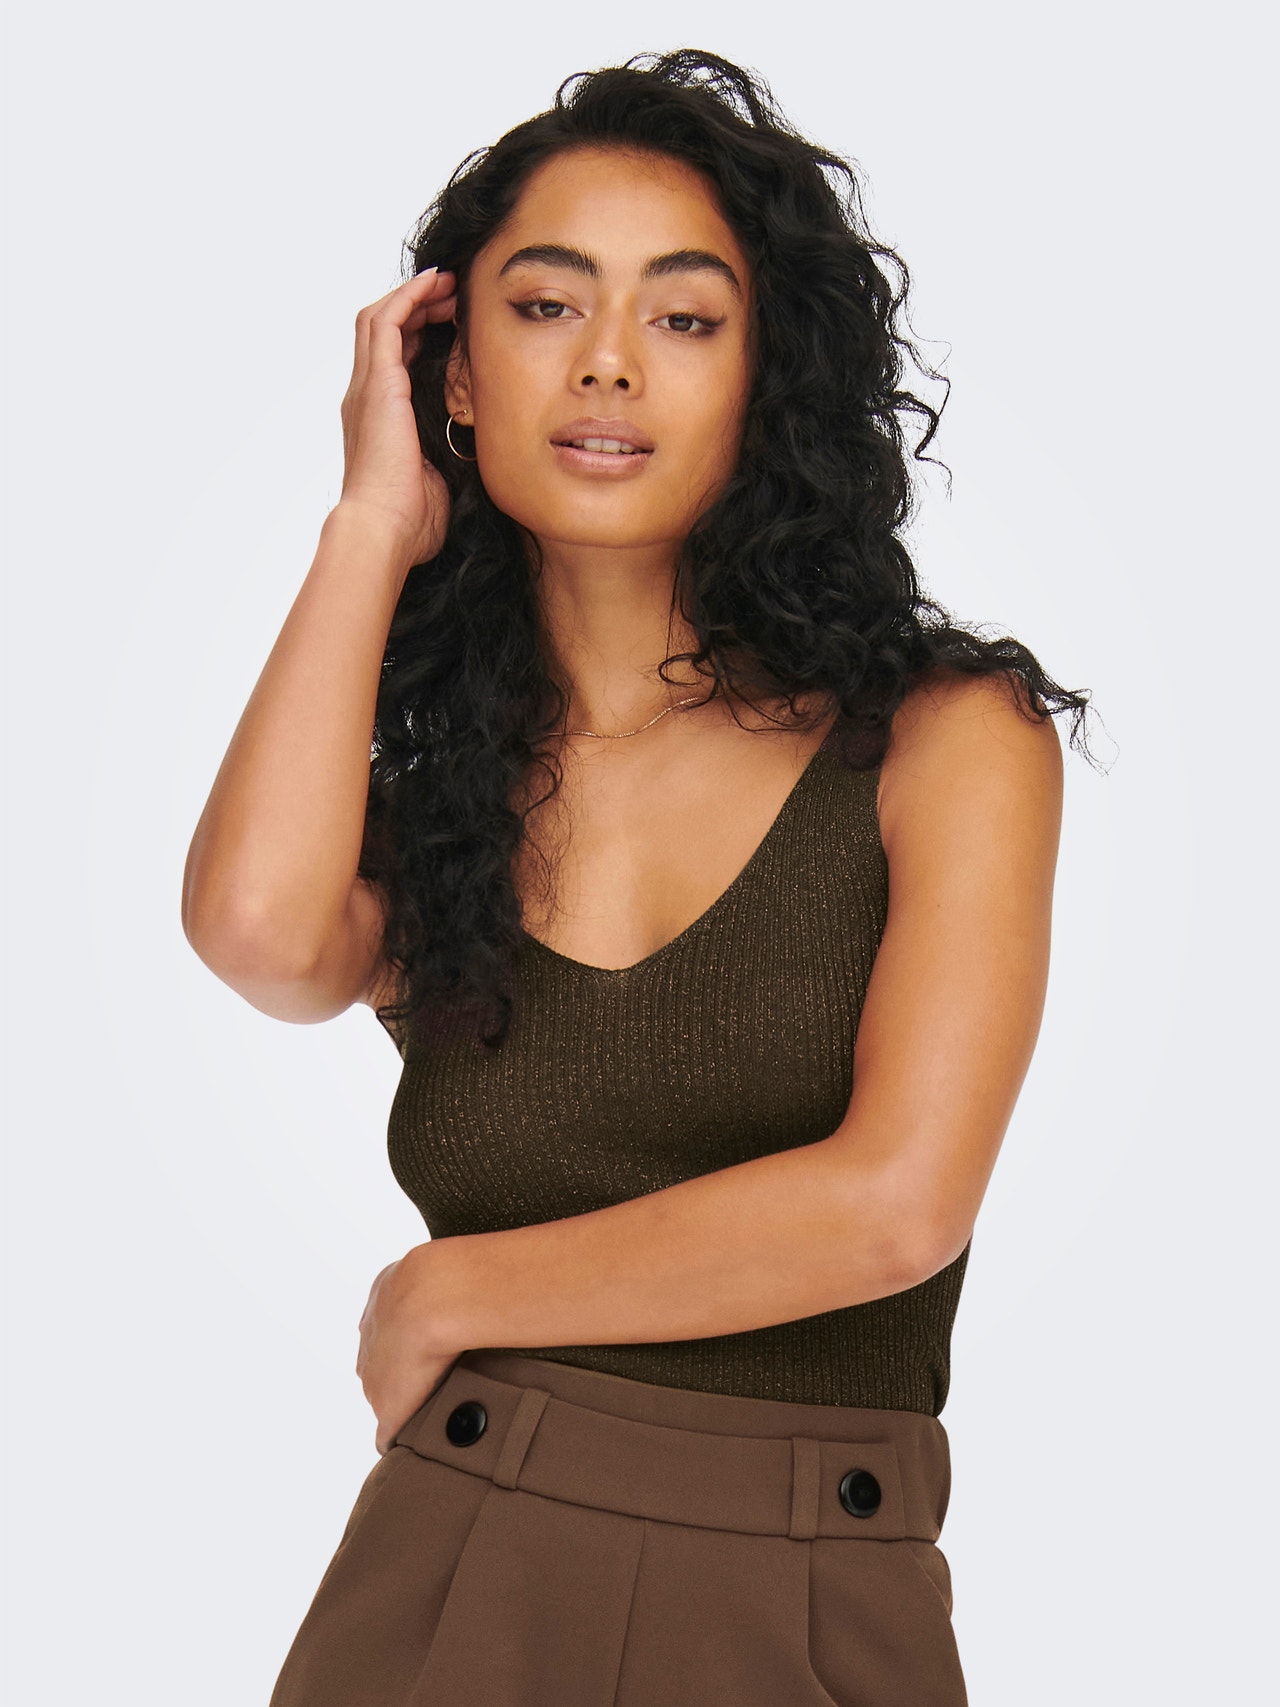 ONLY Col en V Top sans manches -Chocolate Brown - 15216492